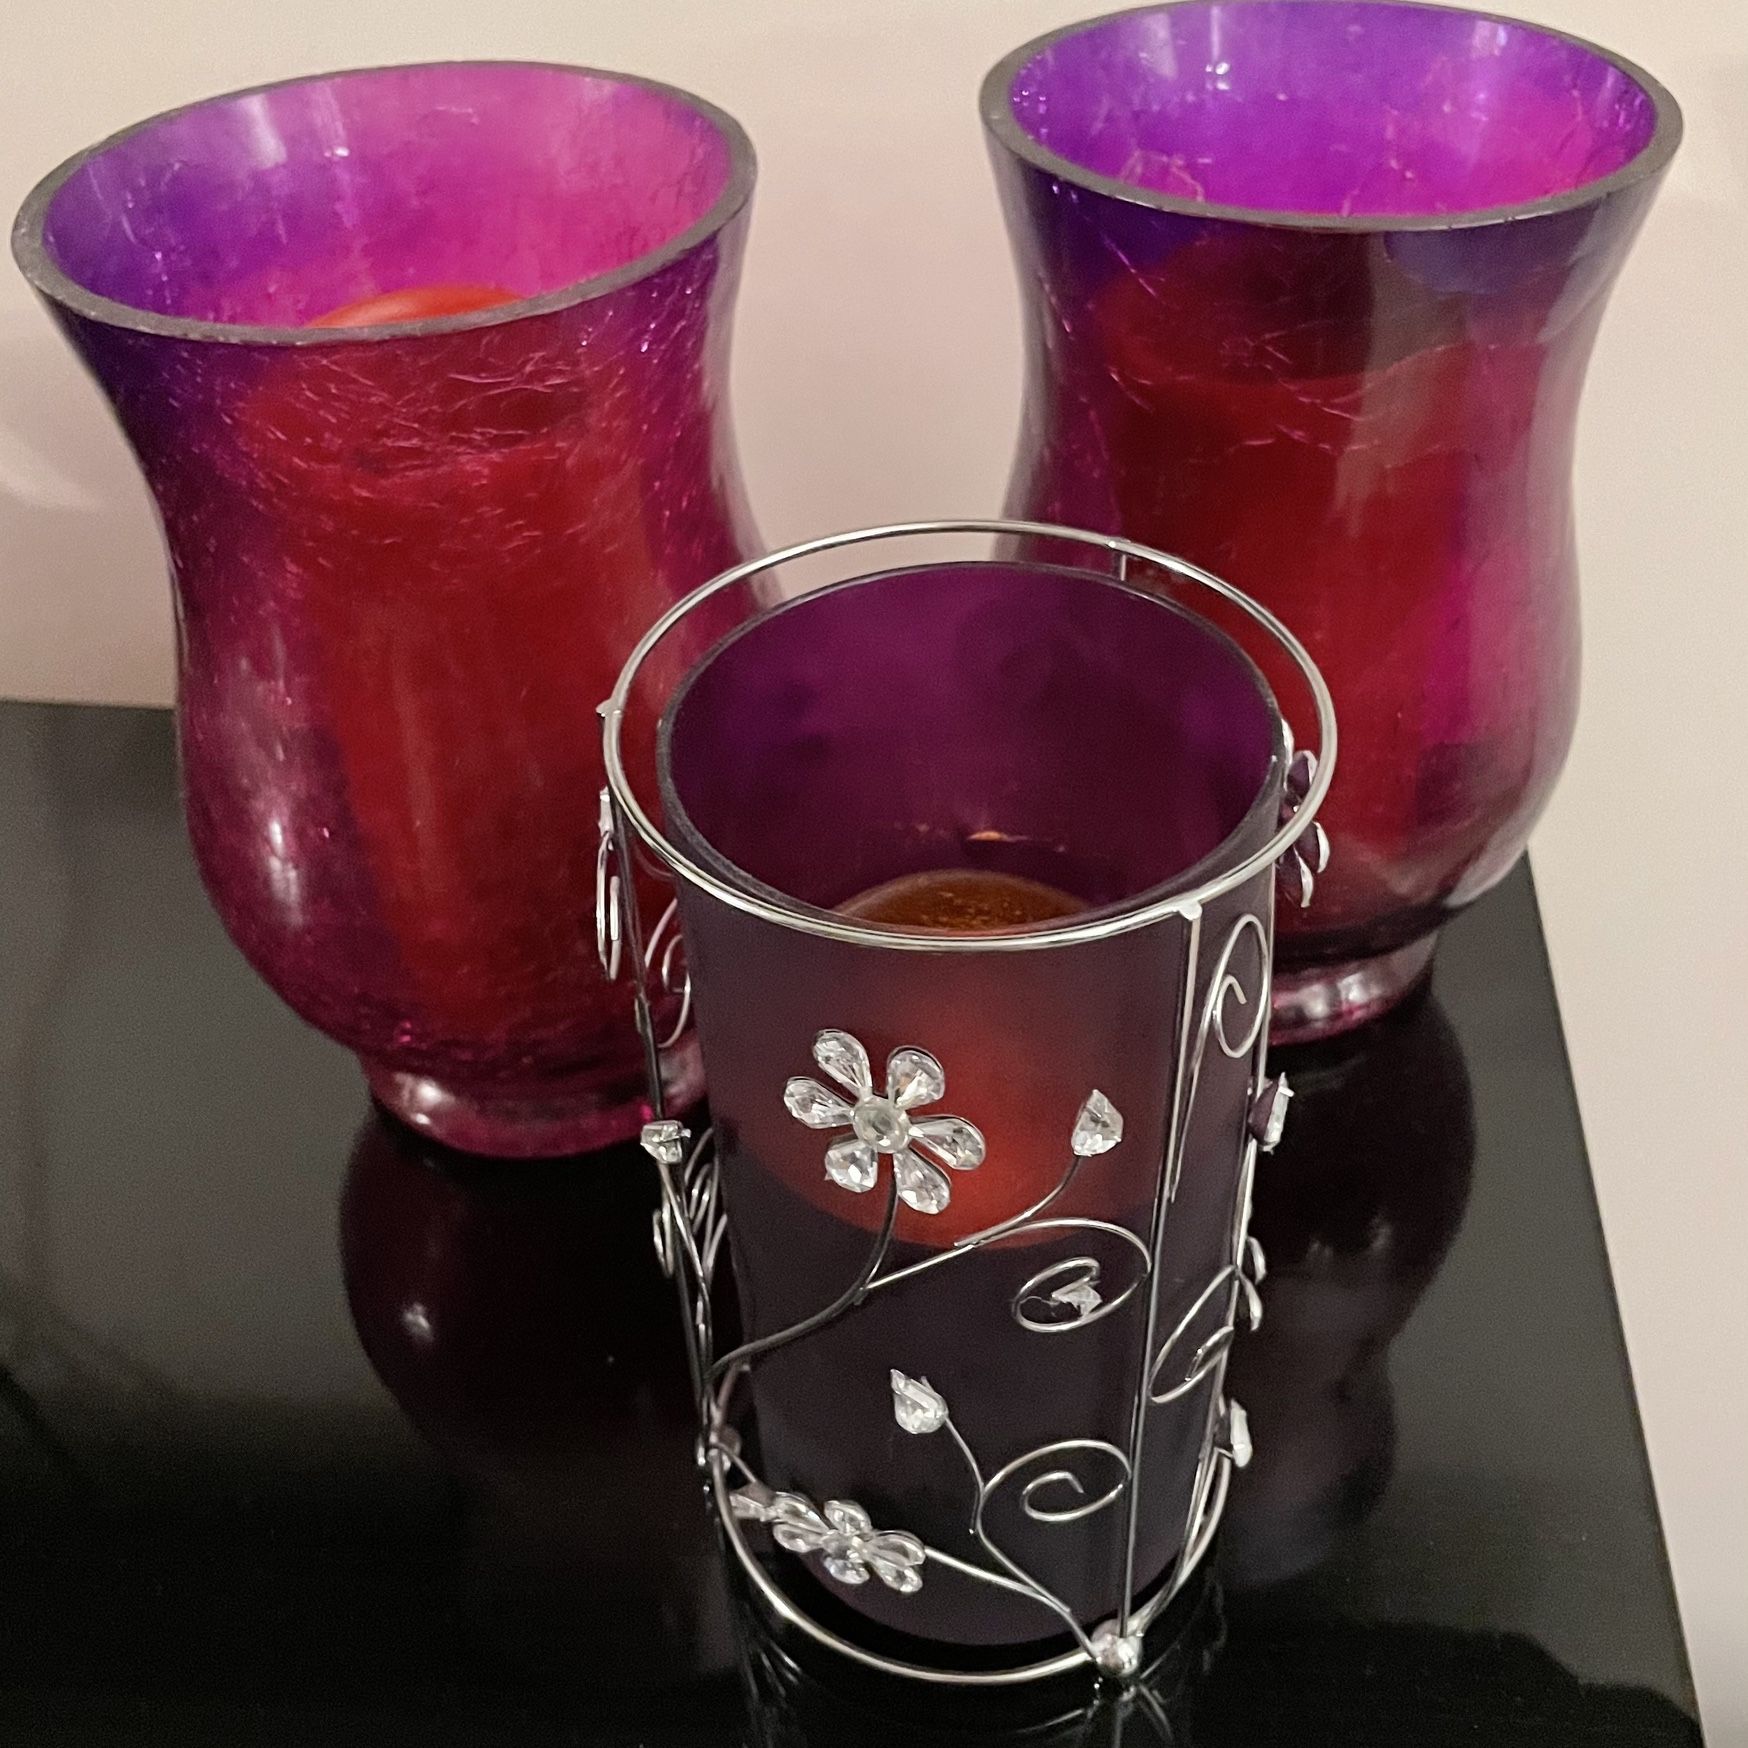 Like New! Candle Set w/ 3 Flameless Candles - Purple Candle Holders & Red Candles